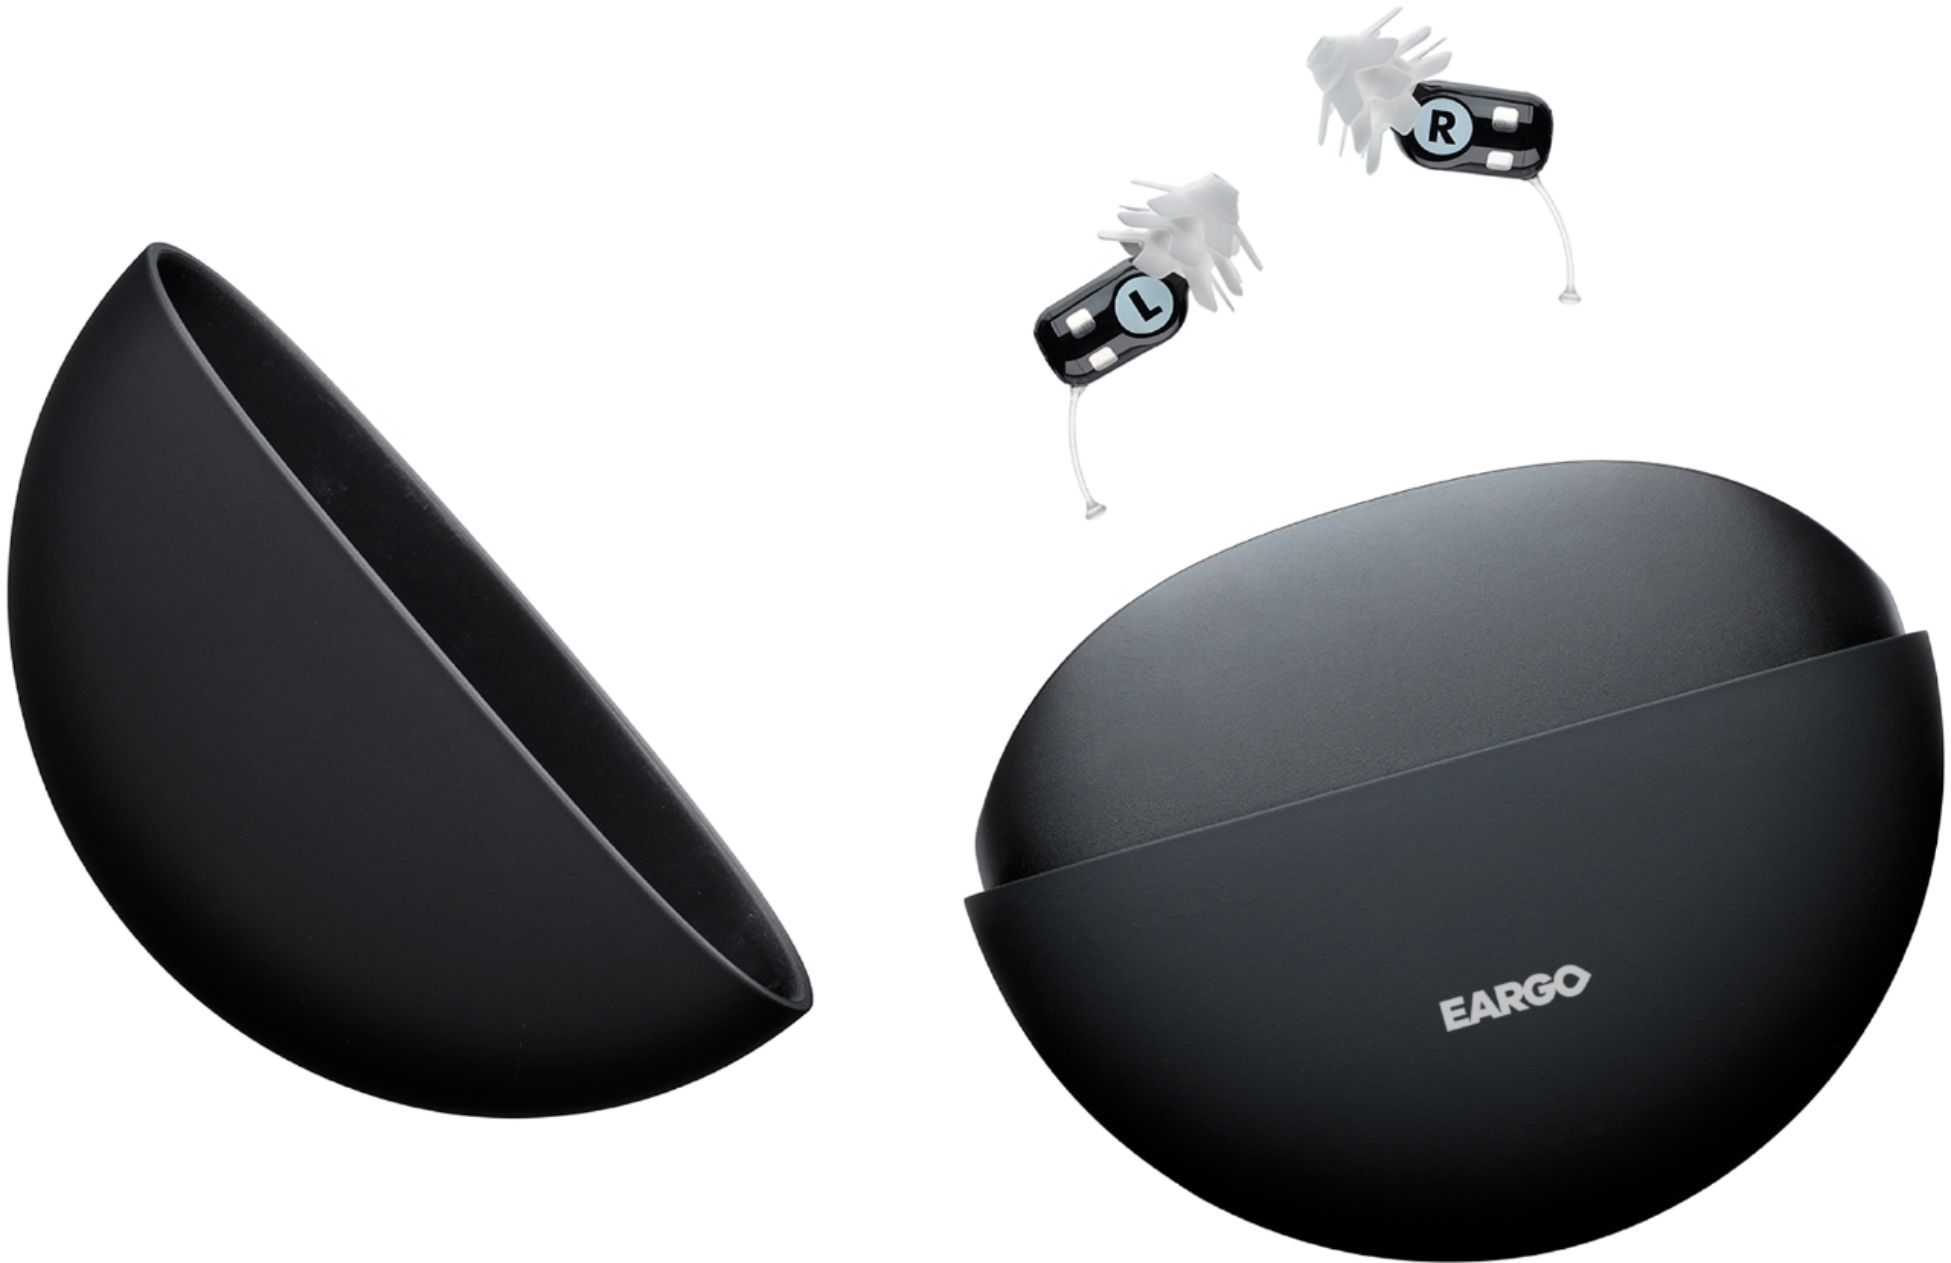 Questions and Answers: Eargo Neo Hearing Aid black 99-0076-001 - Best Buy